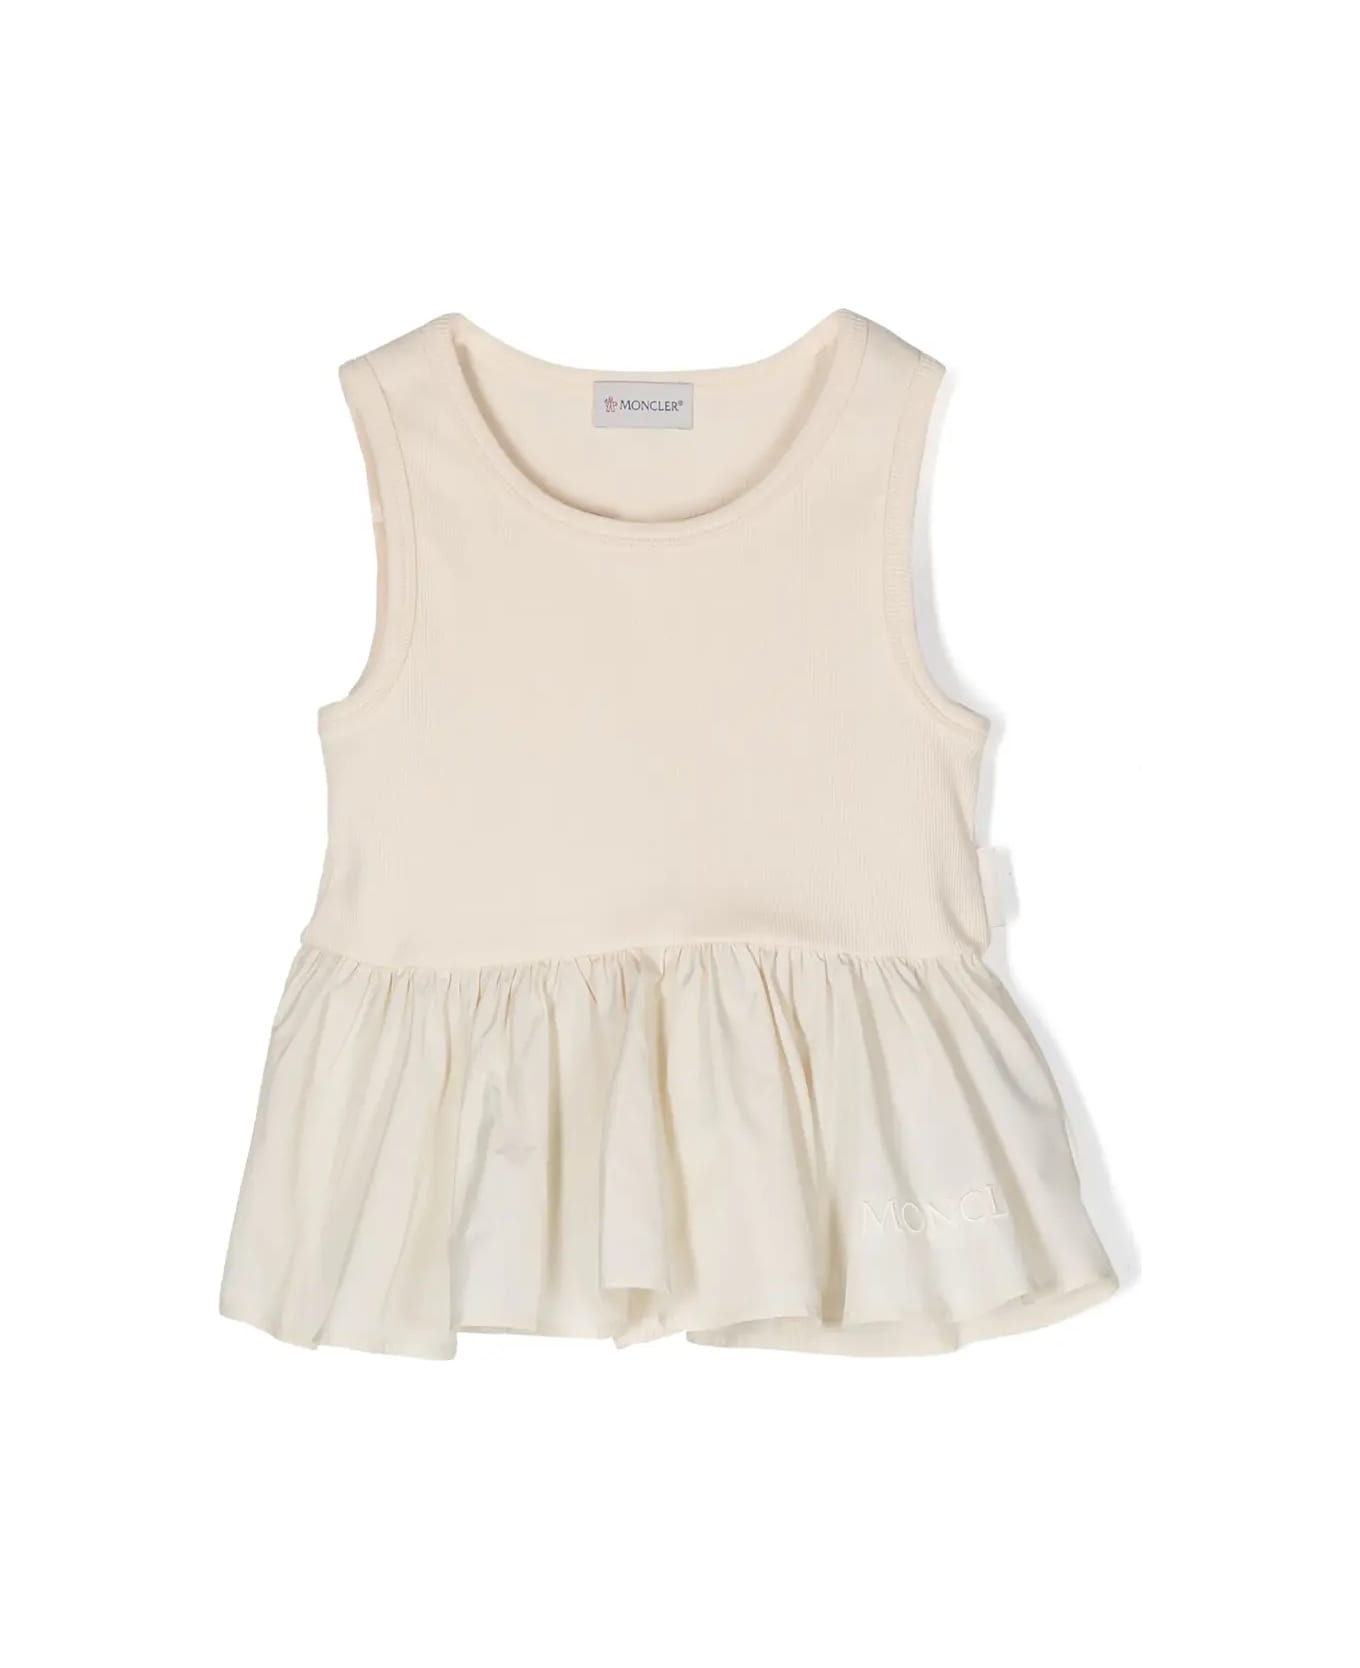 Moncler Ivory Peplum Top With Logo - White トップス